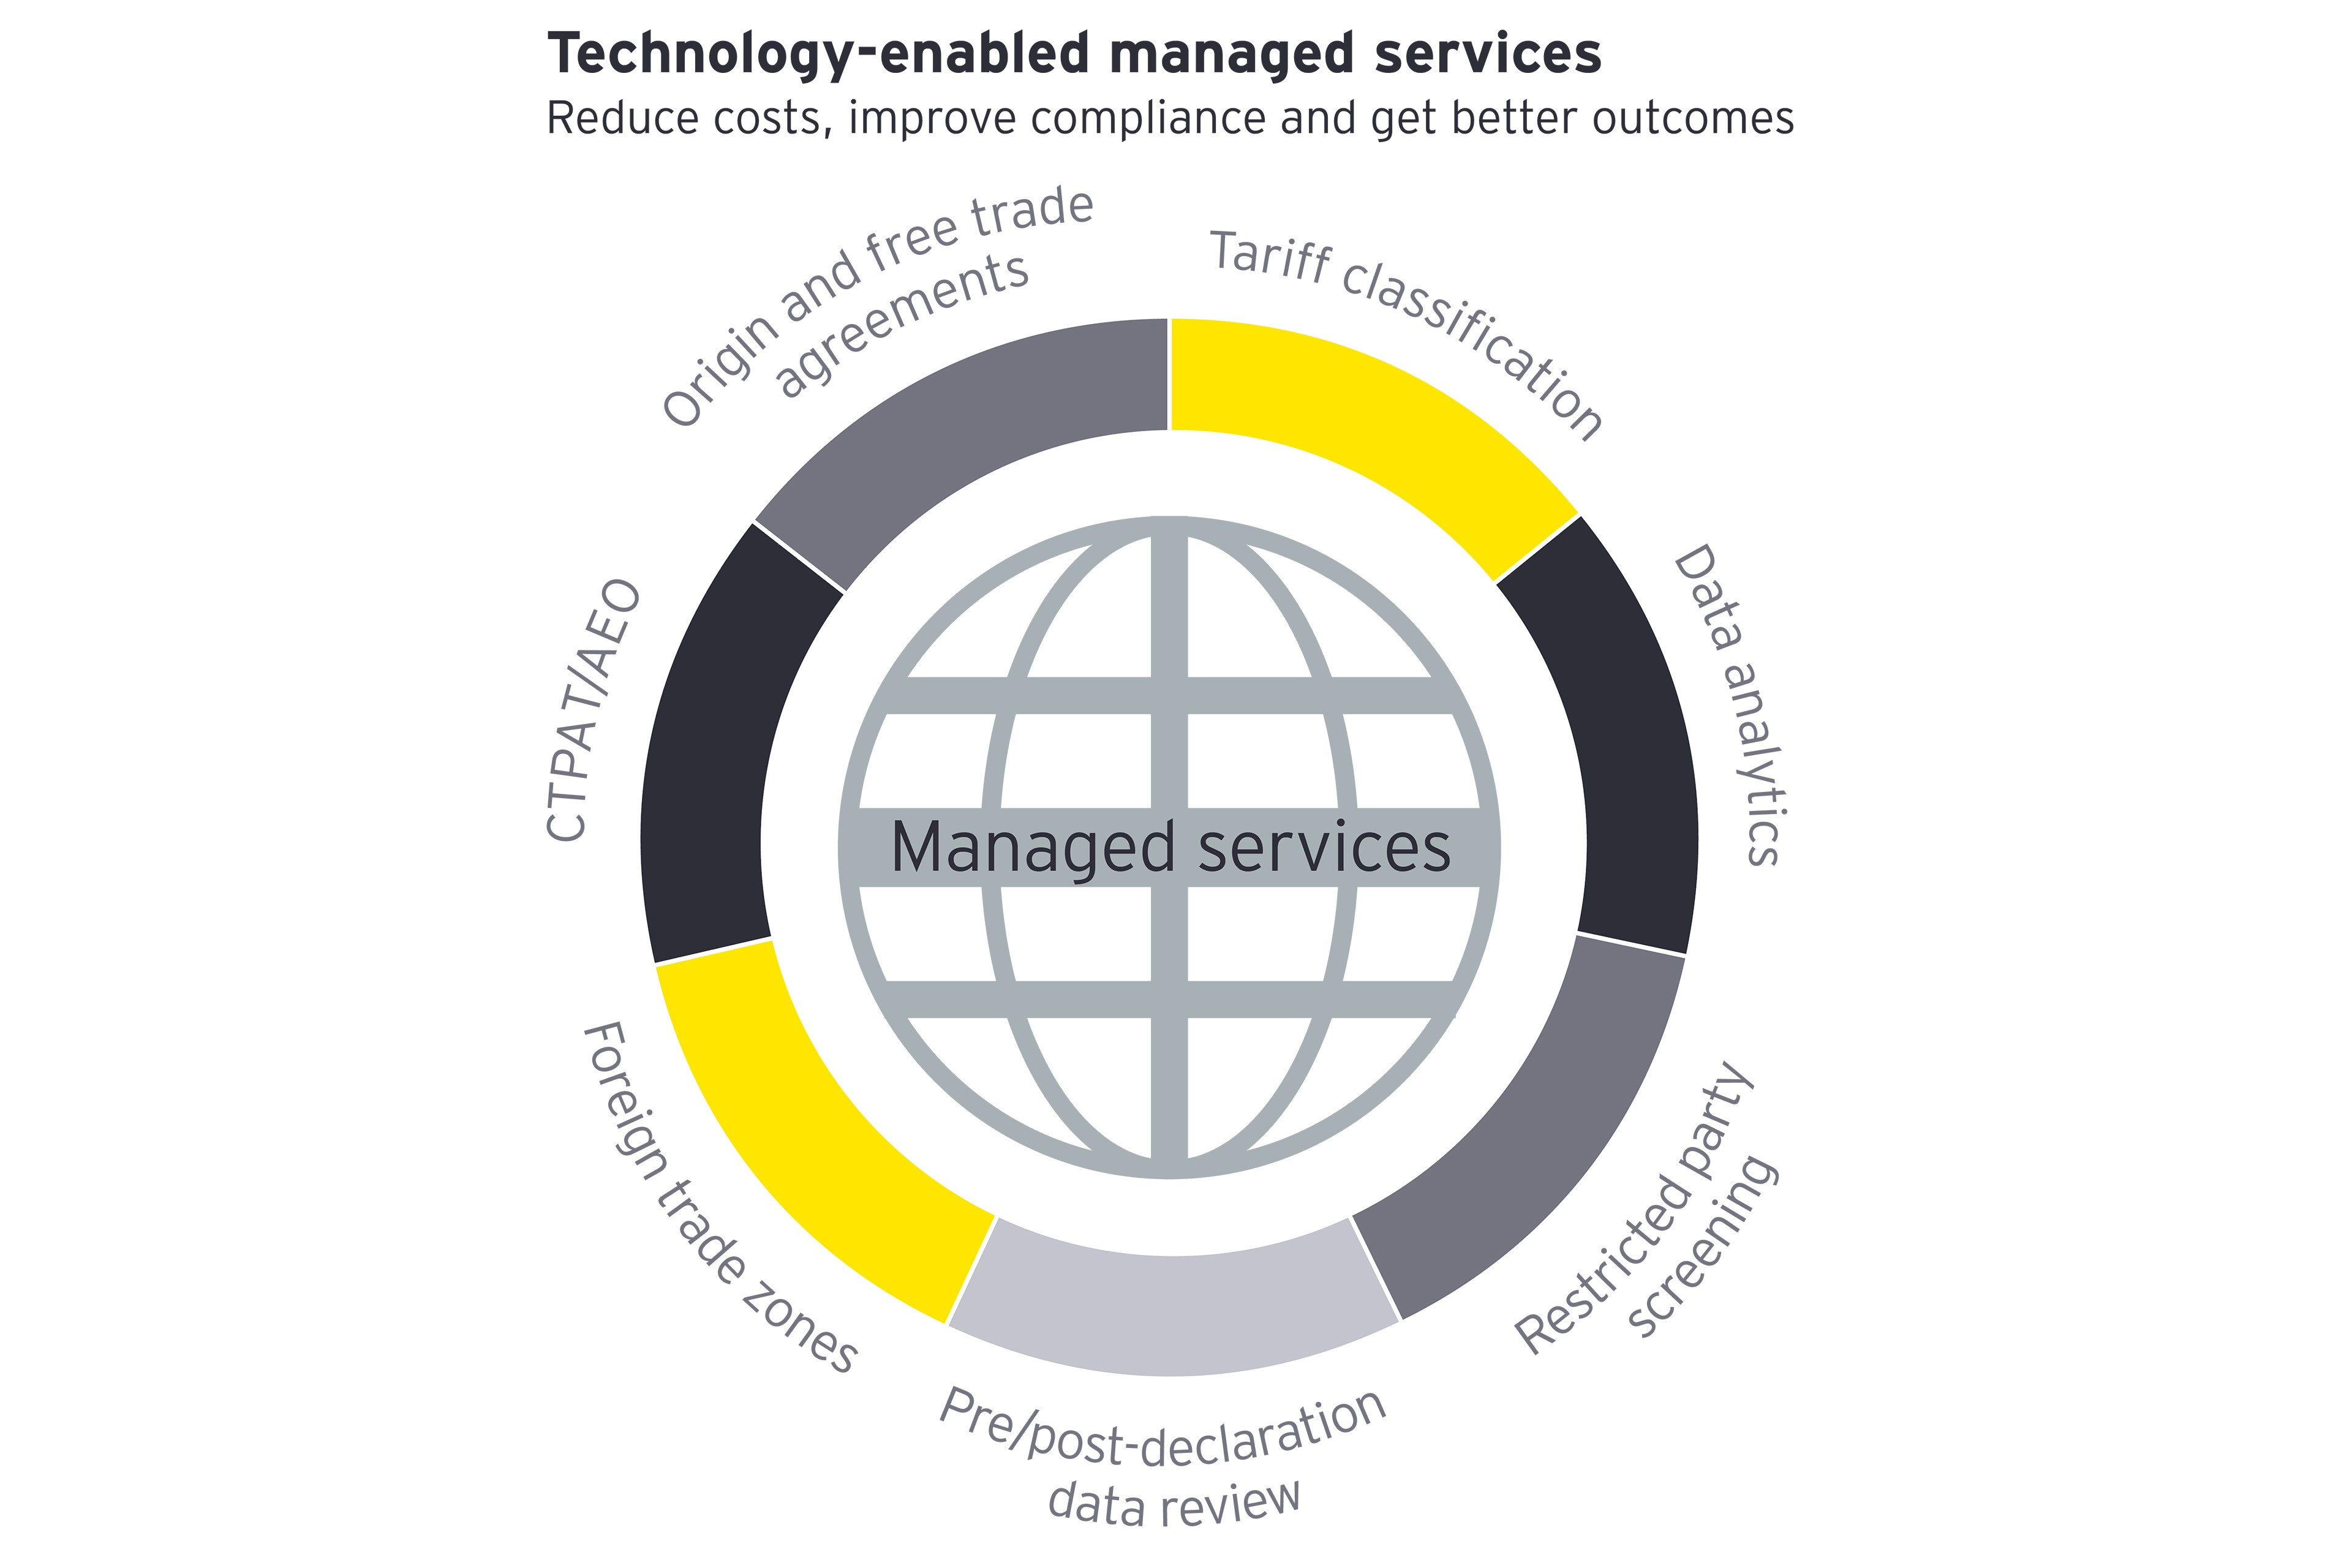 Technology-enabled managed services